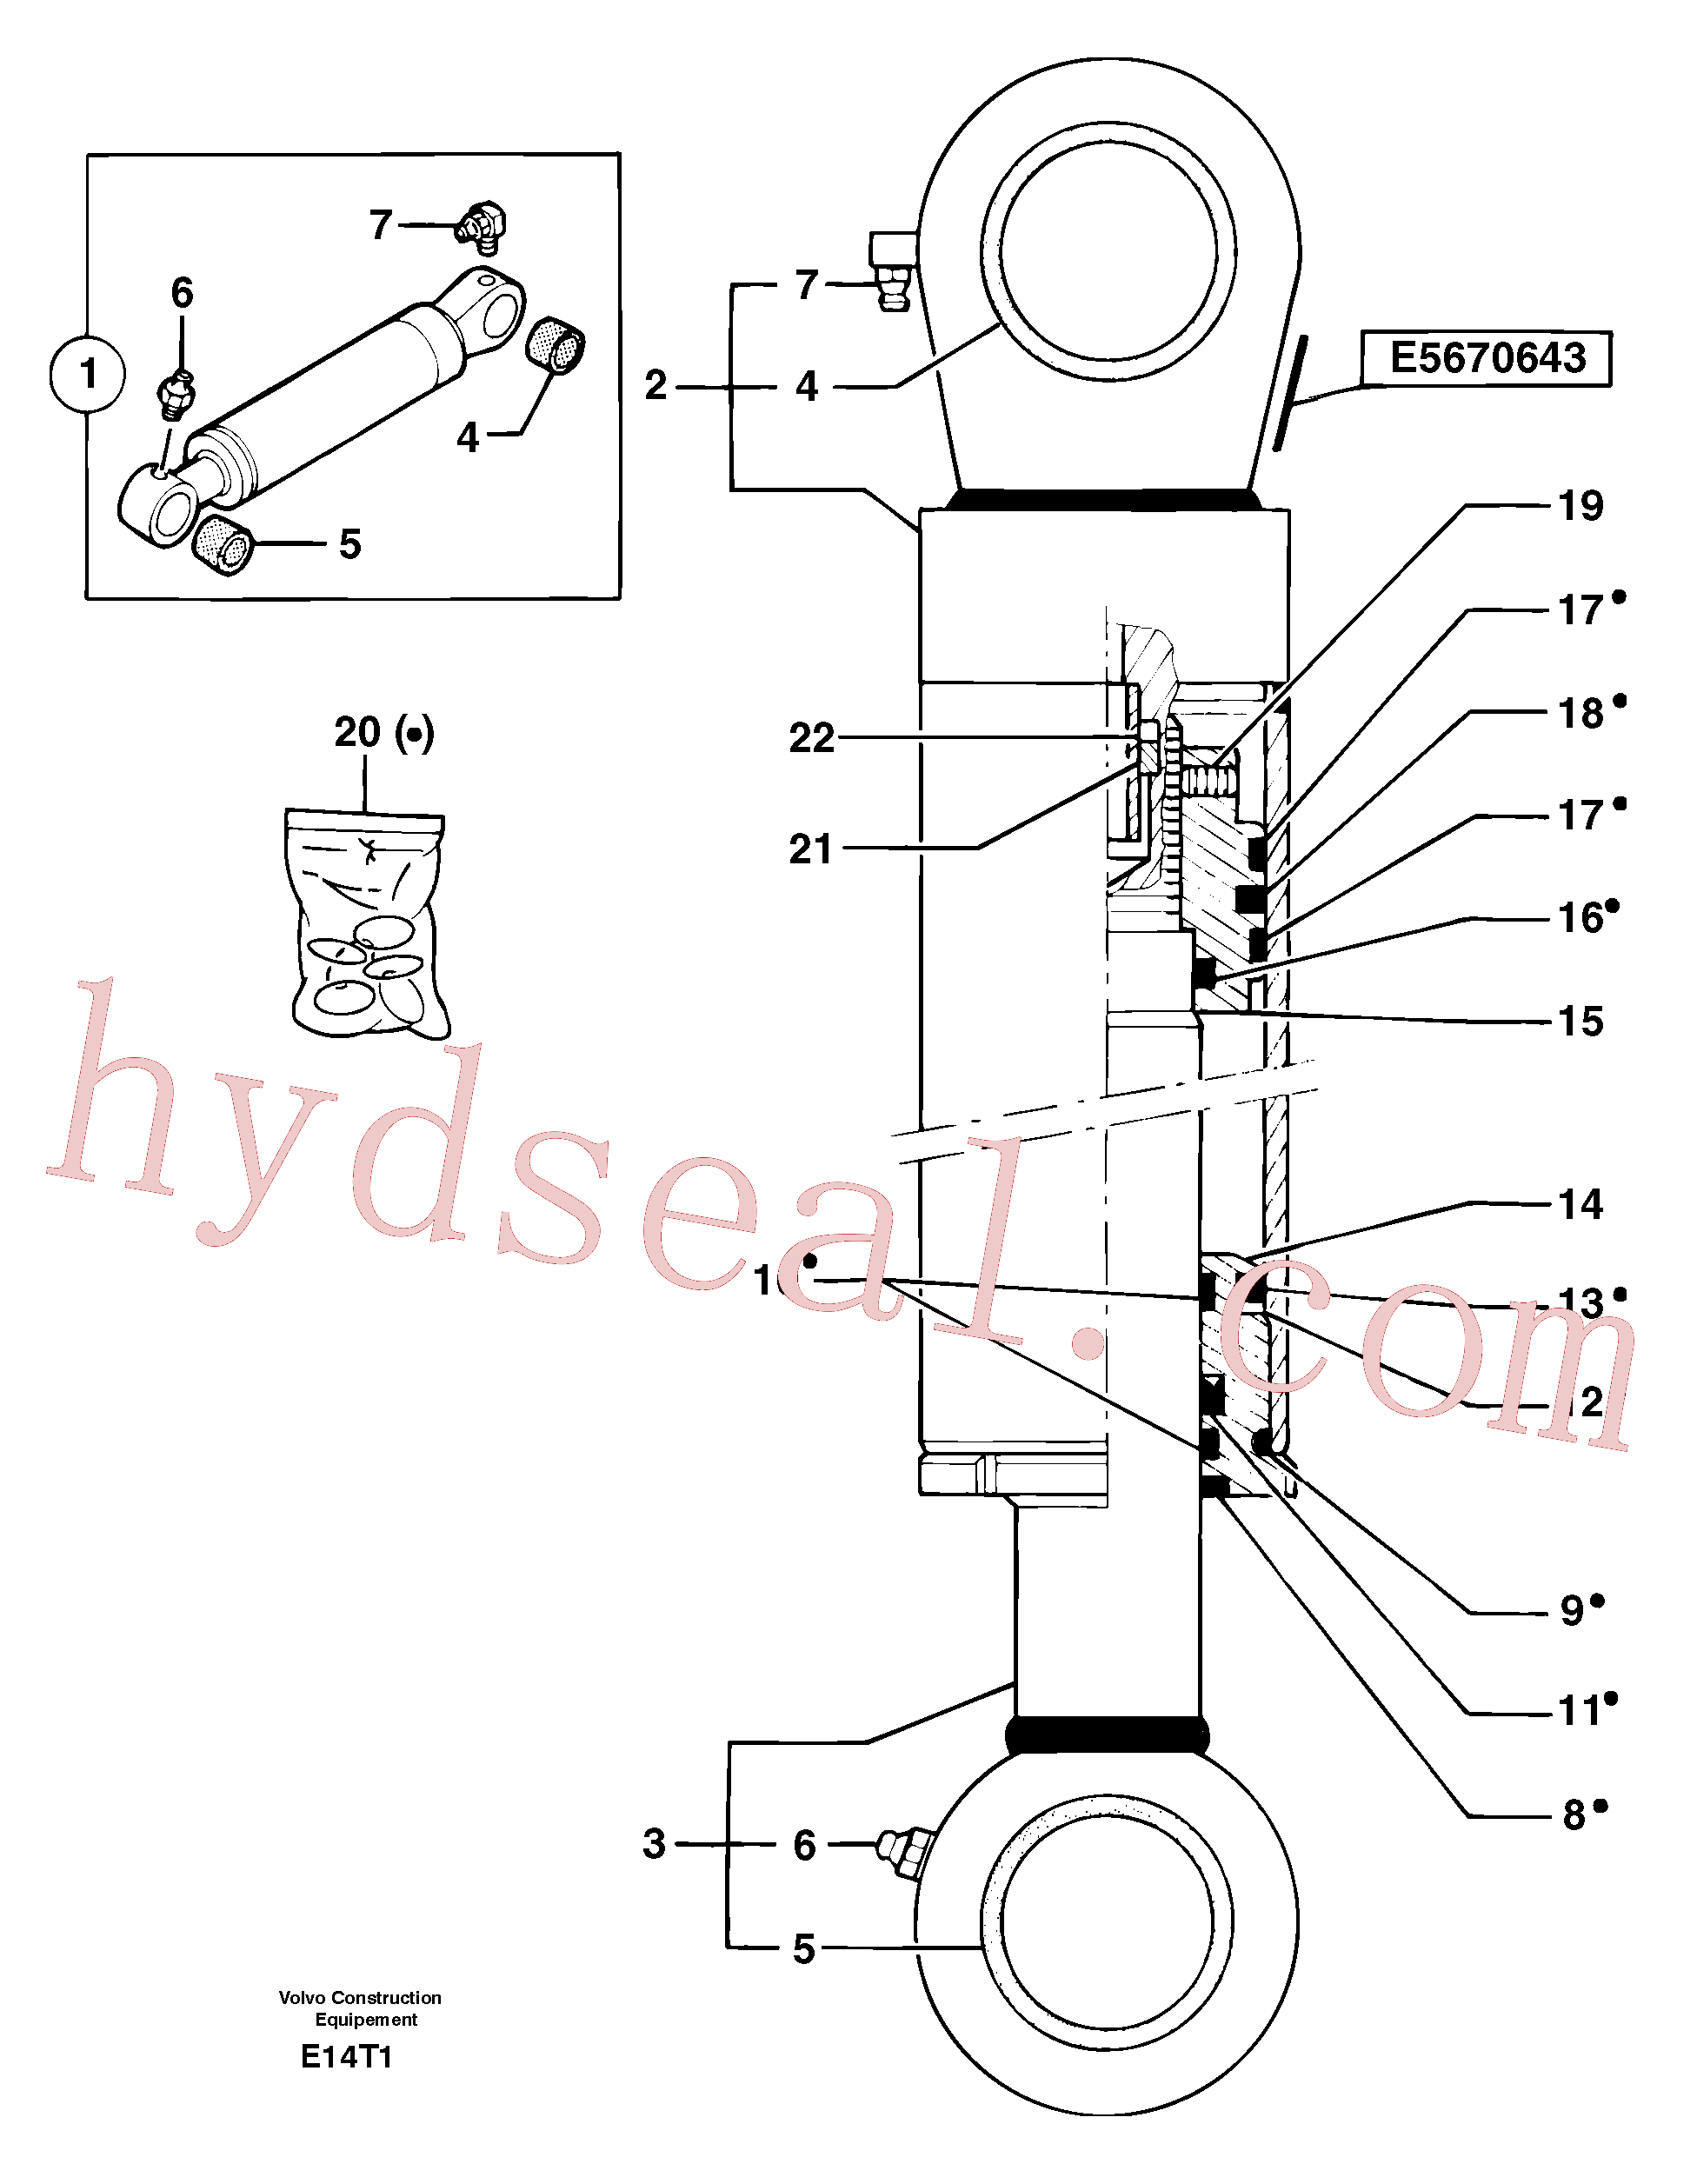 PJ7414621 for Volvo Dipper arm cylinder(E14T1 assembly)